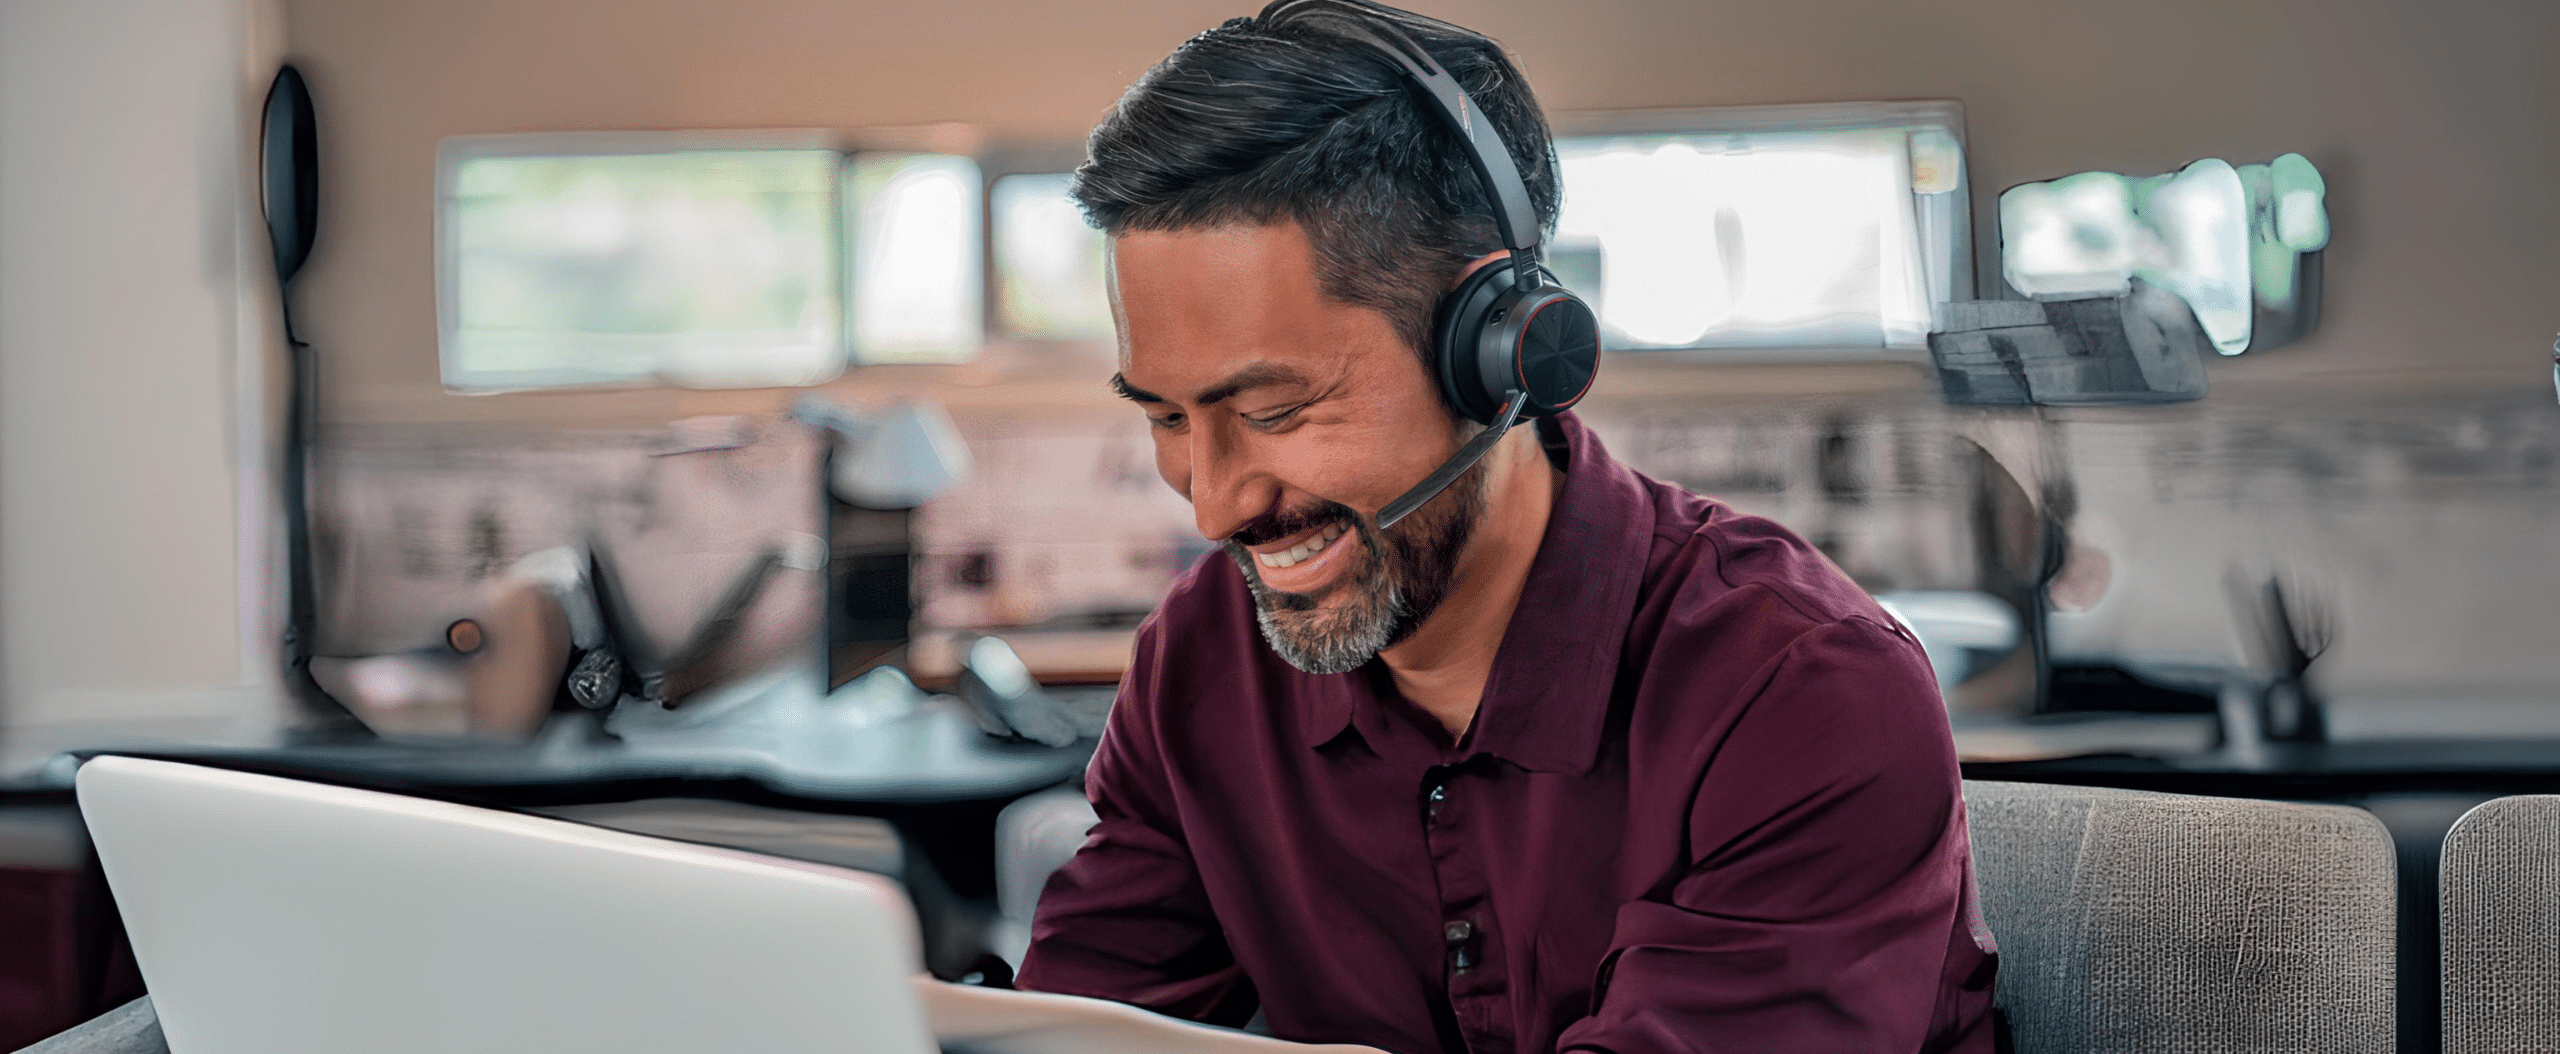 cloud calling positive employee experience with Poly Voyager headset